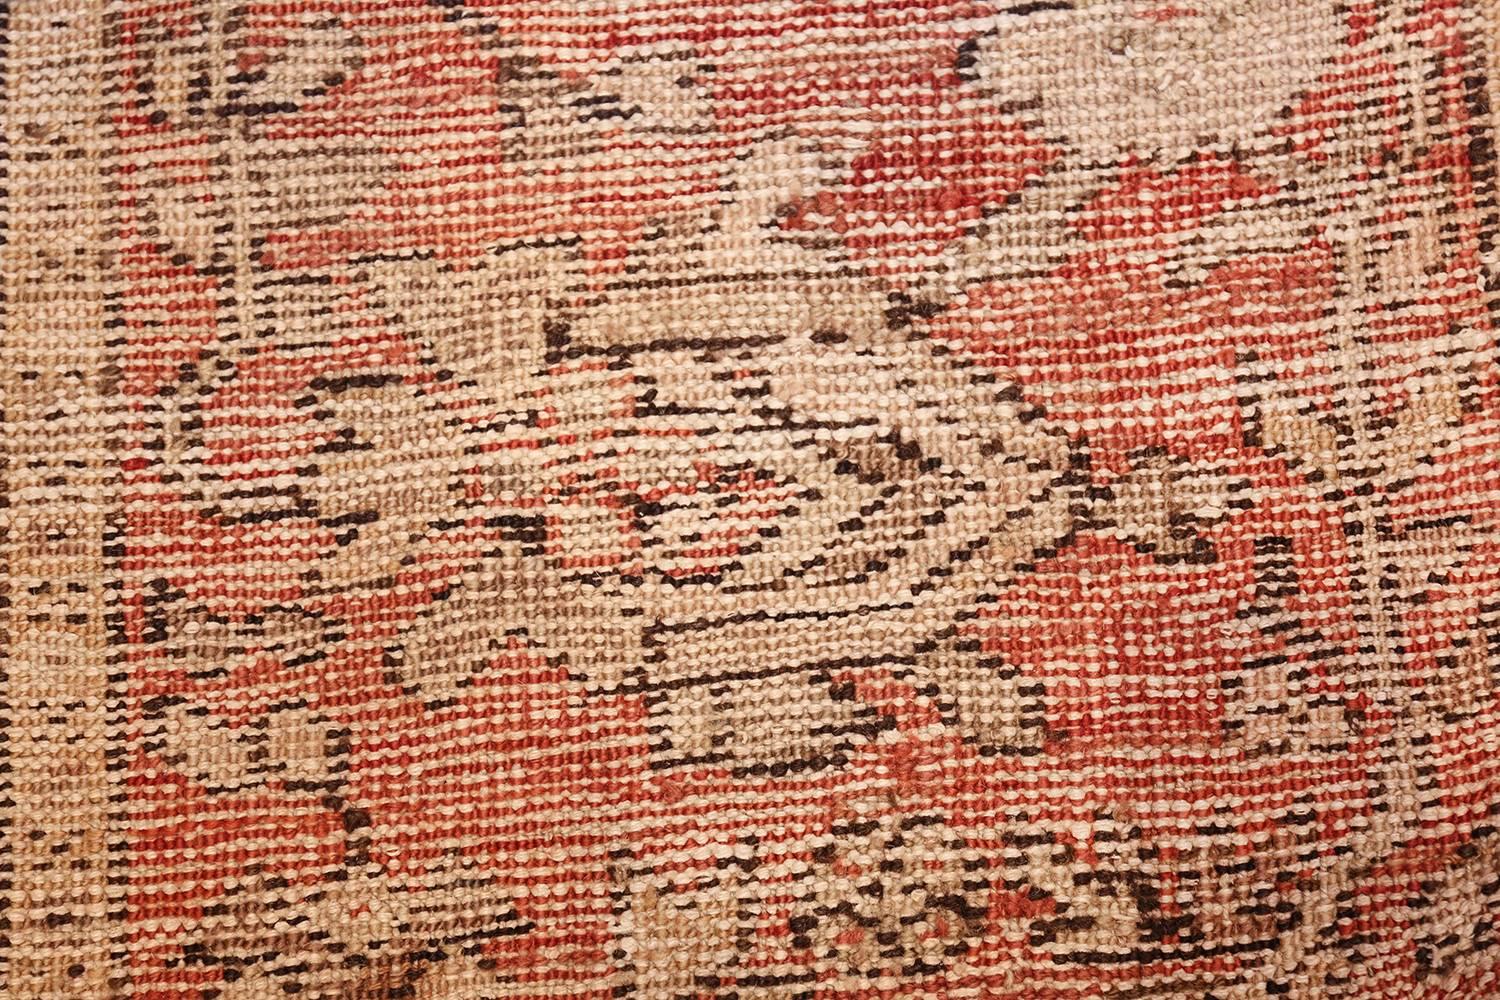 Magnificent and Unique Large Size Ivory Background Tribal Antique Turkish Oushak Rug, Country of Origin / Rug Type: Turkish Rug, Circa Date: 1900. Size: 15 ft 10 in x 19 ft 7 in (4.83 m x 5.97 m).